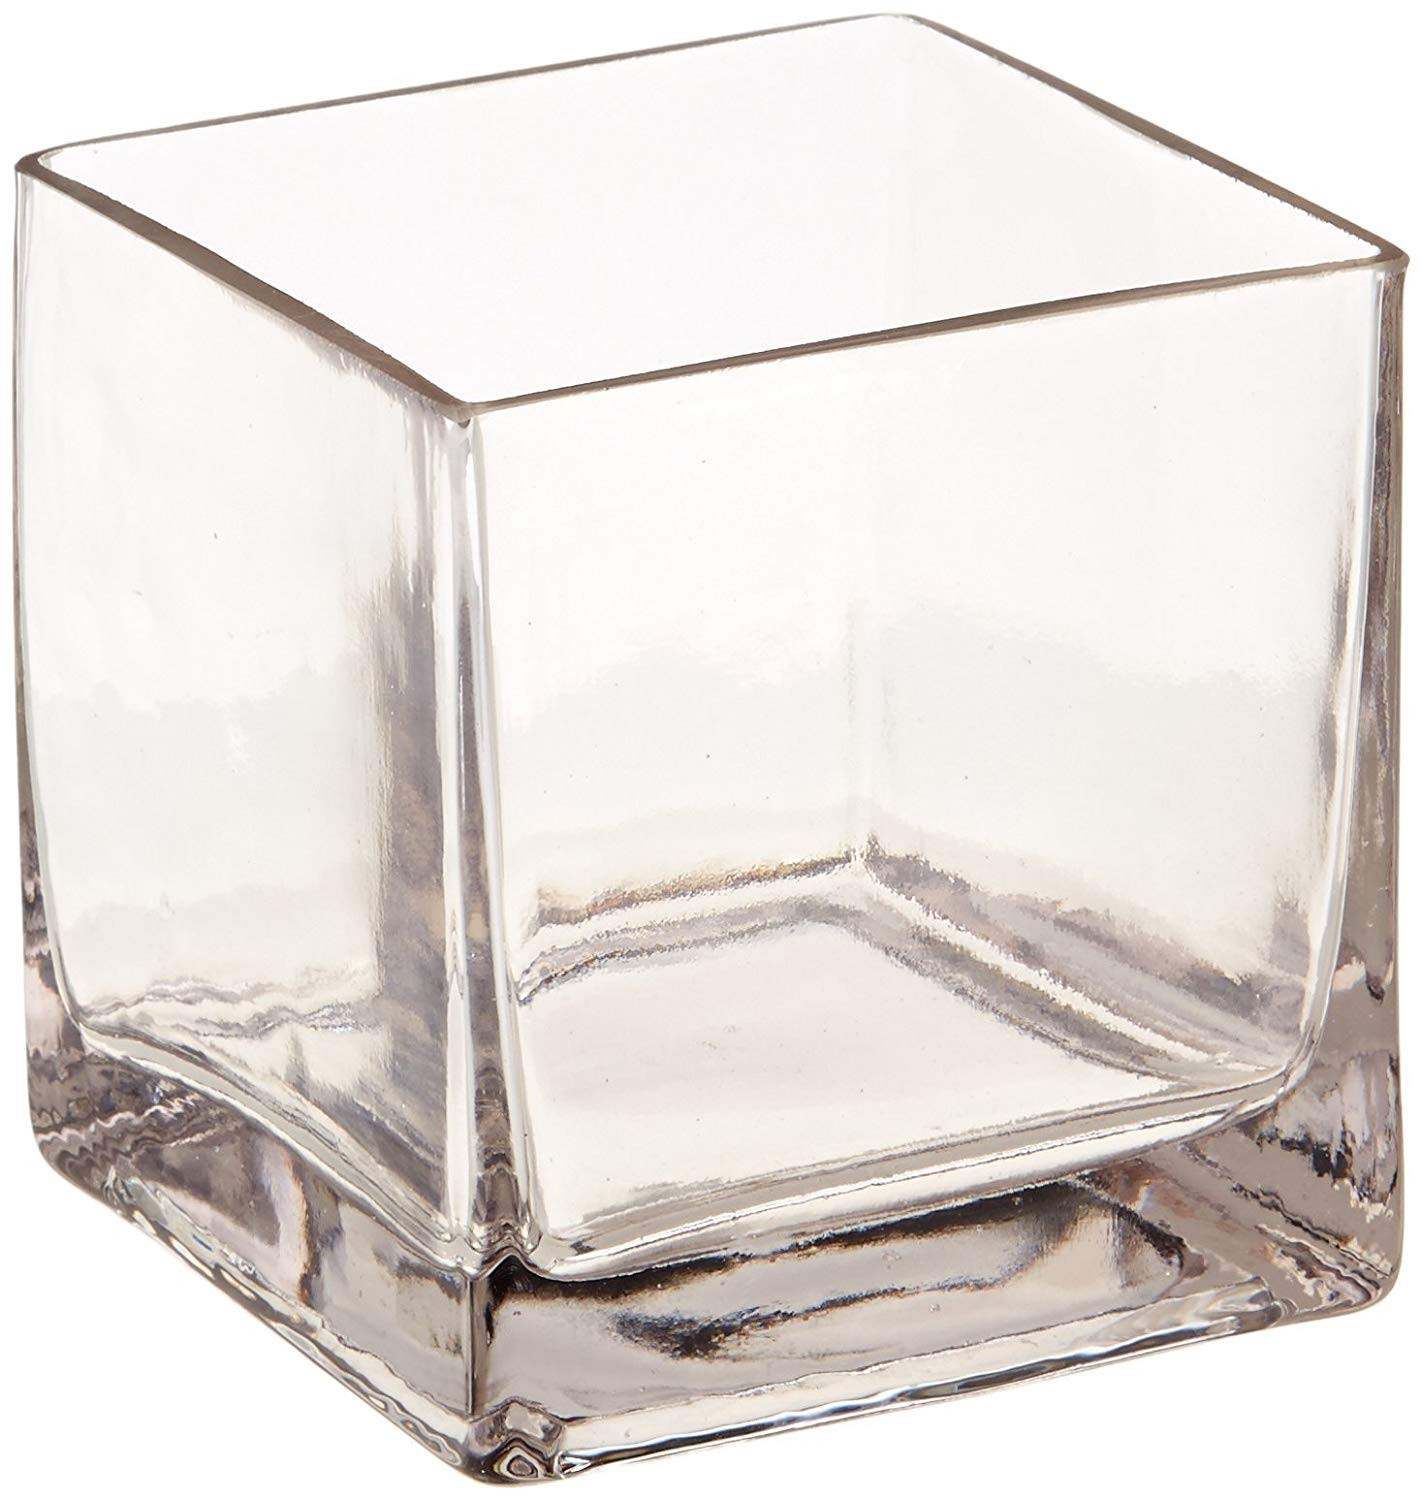 21 Famous 20 Inch Clear Glass Cylinder Vase 2024 free download 20 inch clear glass cylinder vase of amazon com 12piece 4 square crystal clear glass vase home kitchen with regard to 71 jezfmvnl sl1500